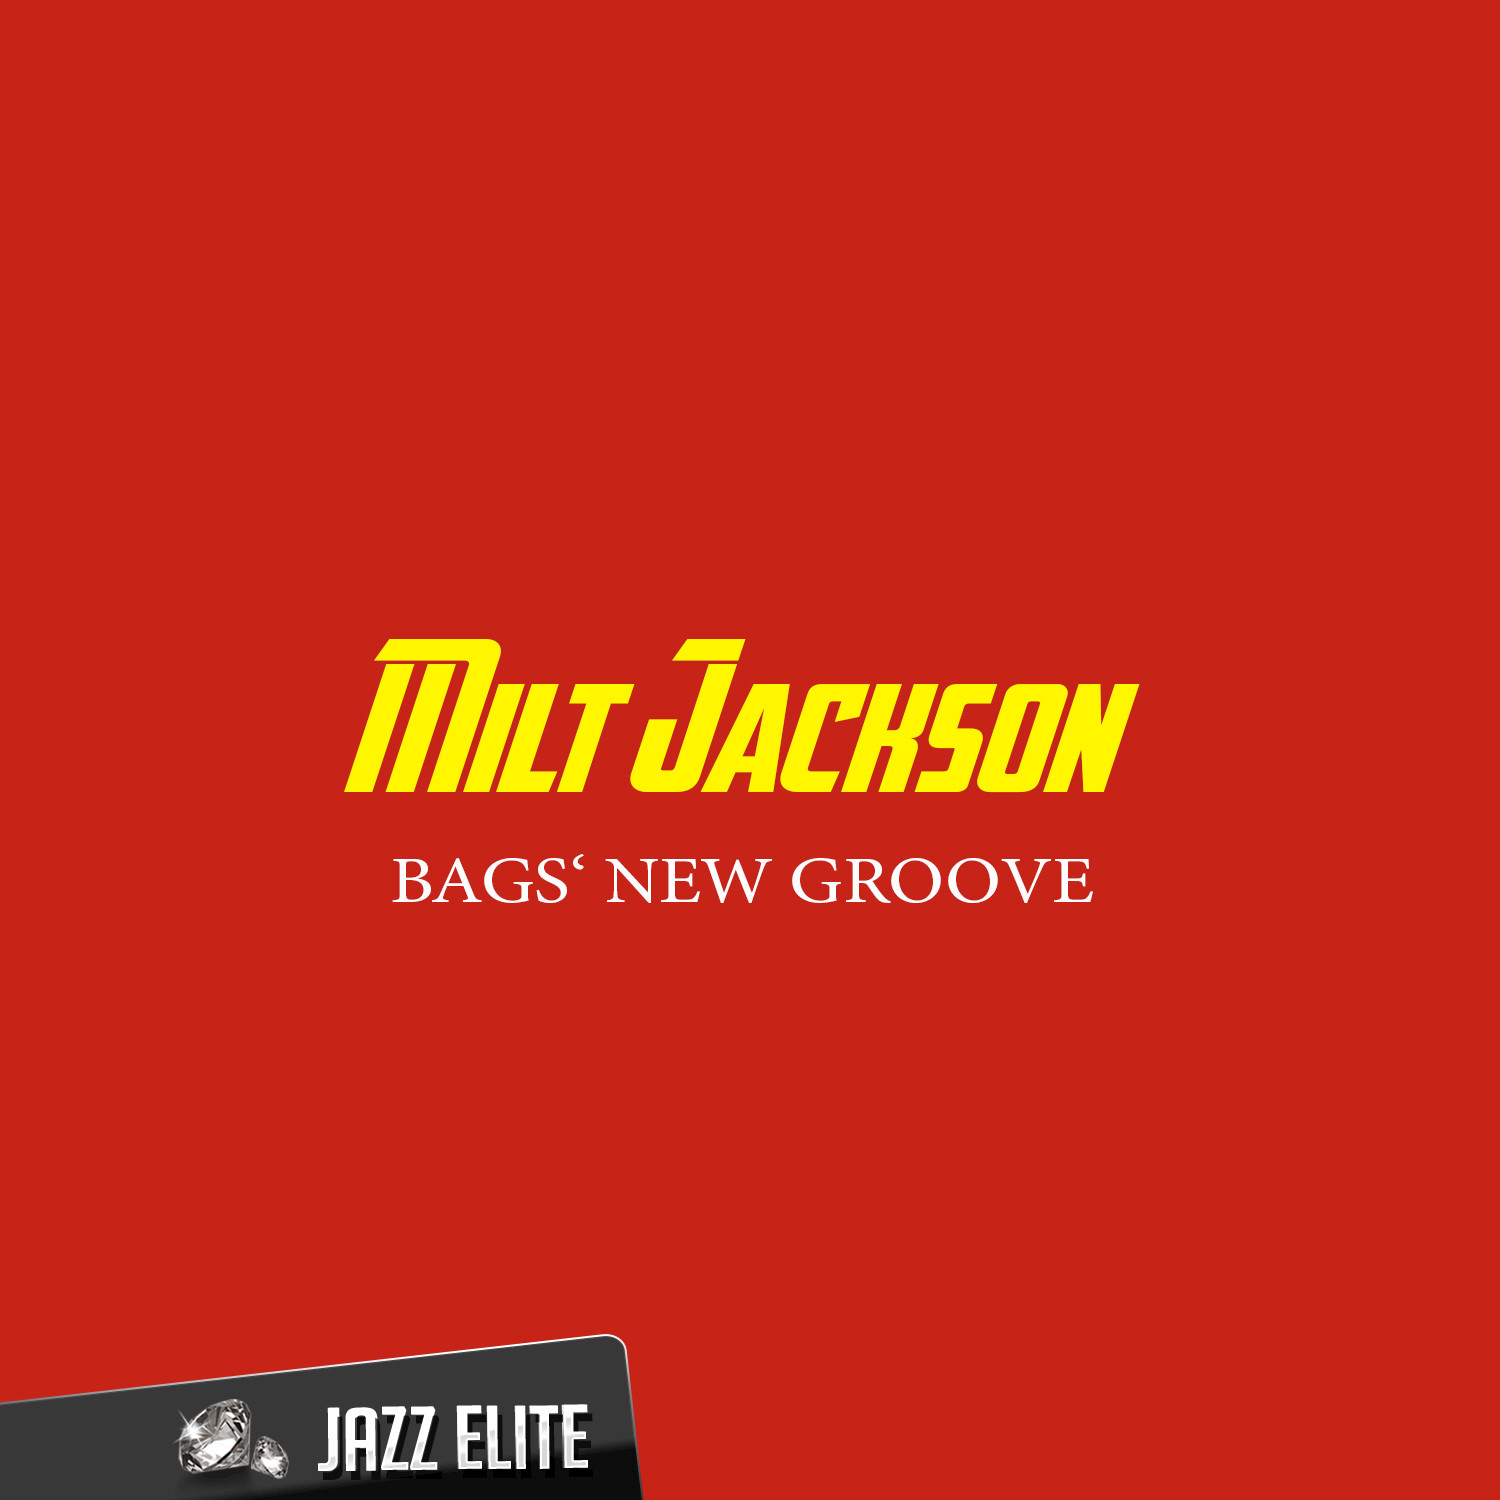 Bags' New Groove